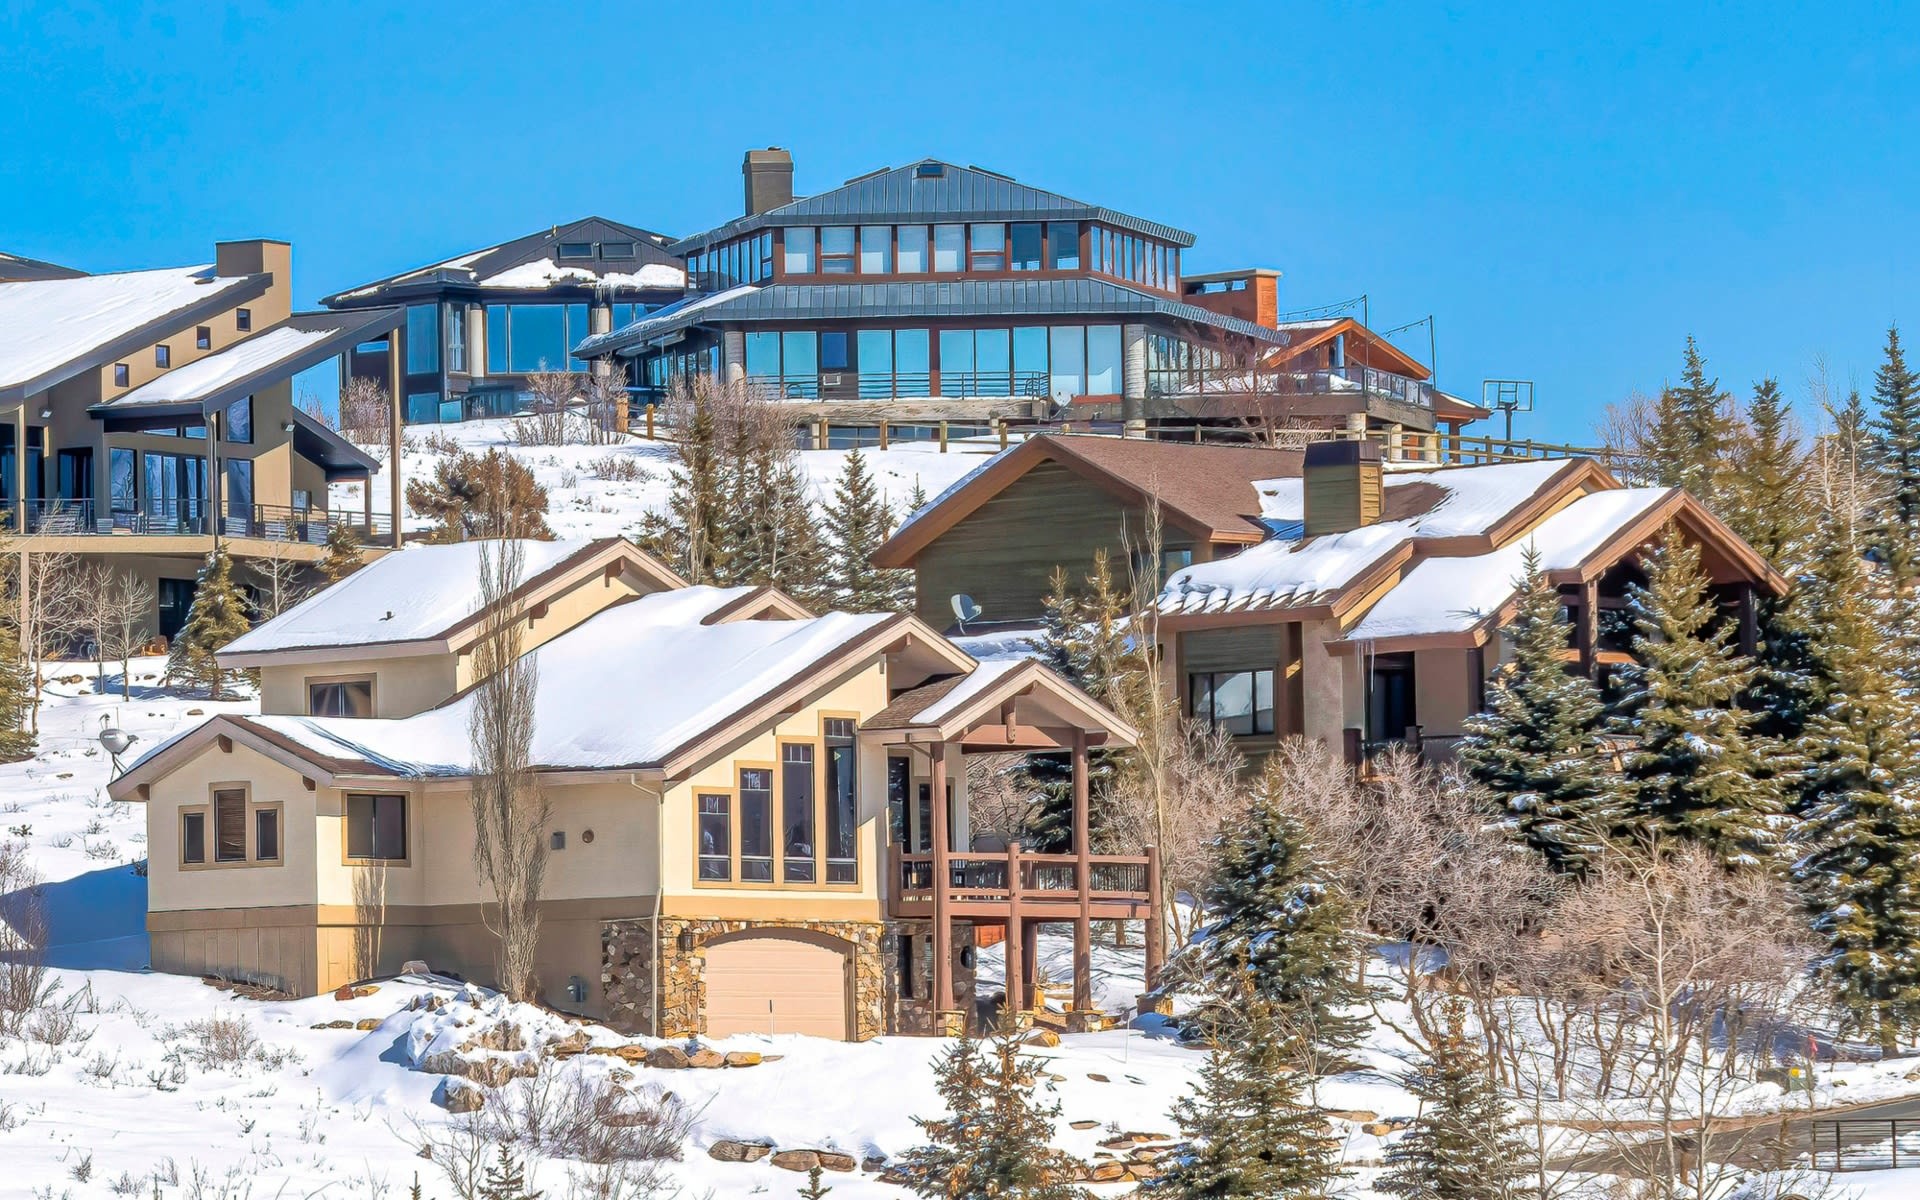 ADD VALUE TO YOUR PARK CITY HOME